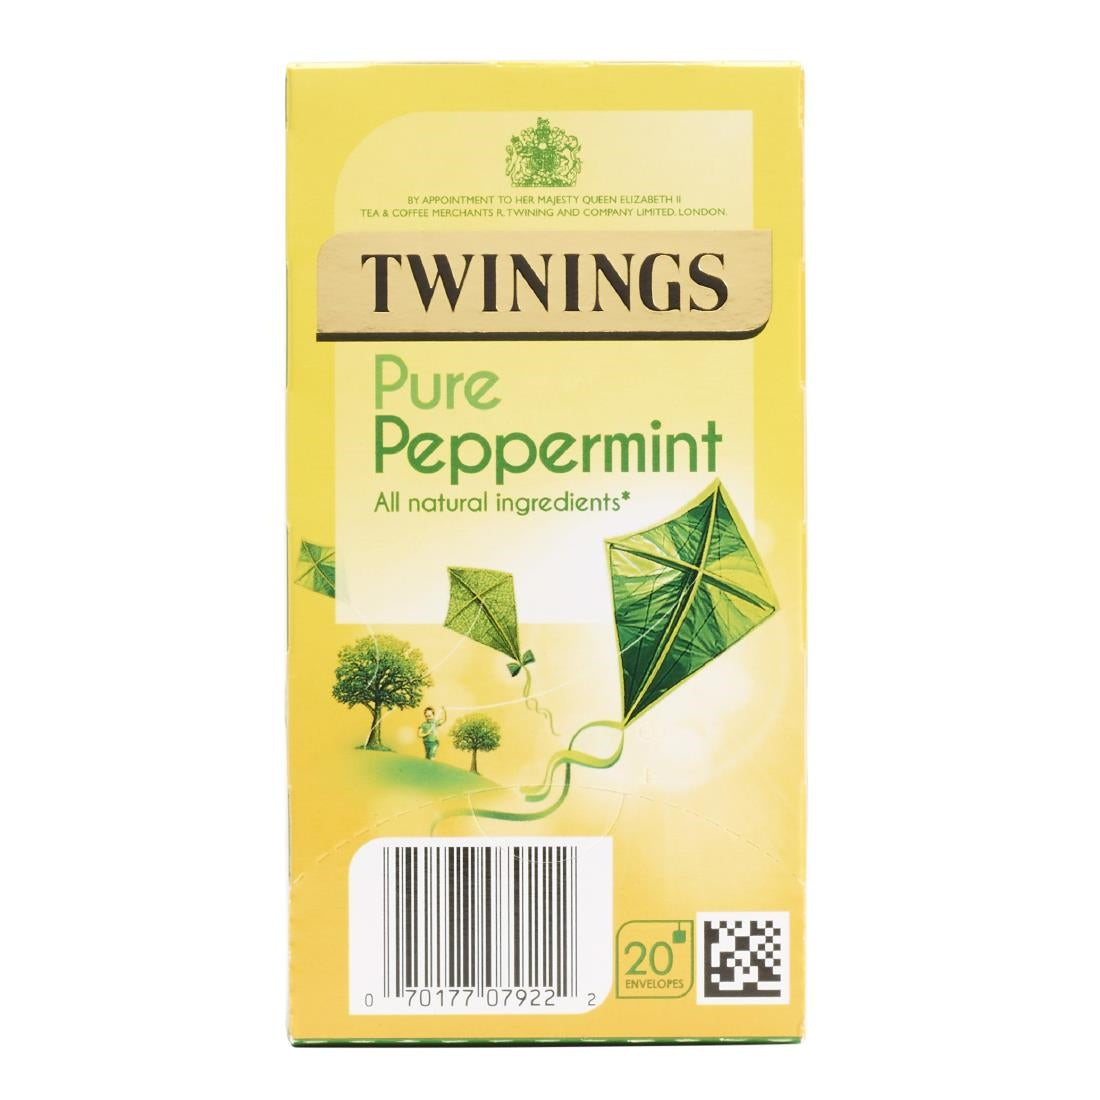 DZ464 Twinings Pure Peppermint Enveloped Tea Bags (Pack of 240)